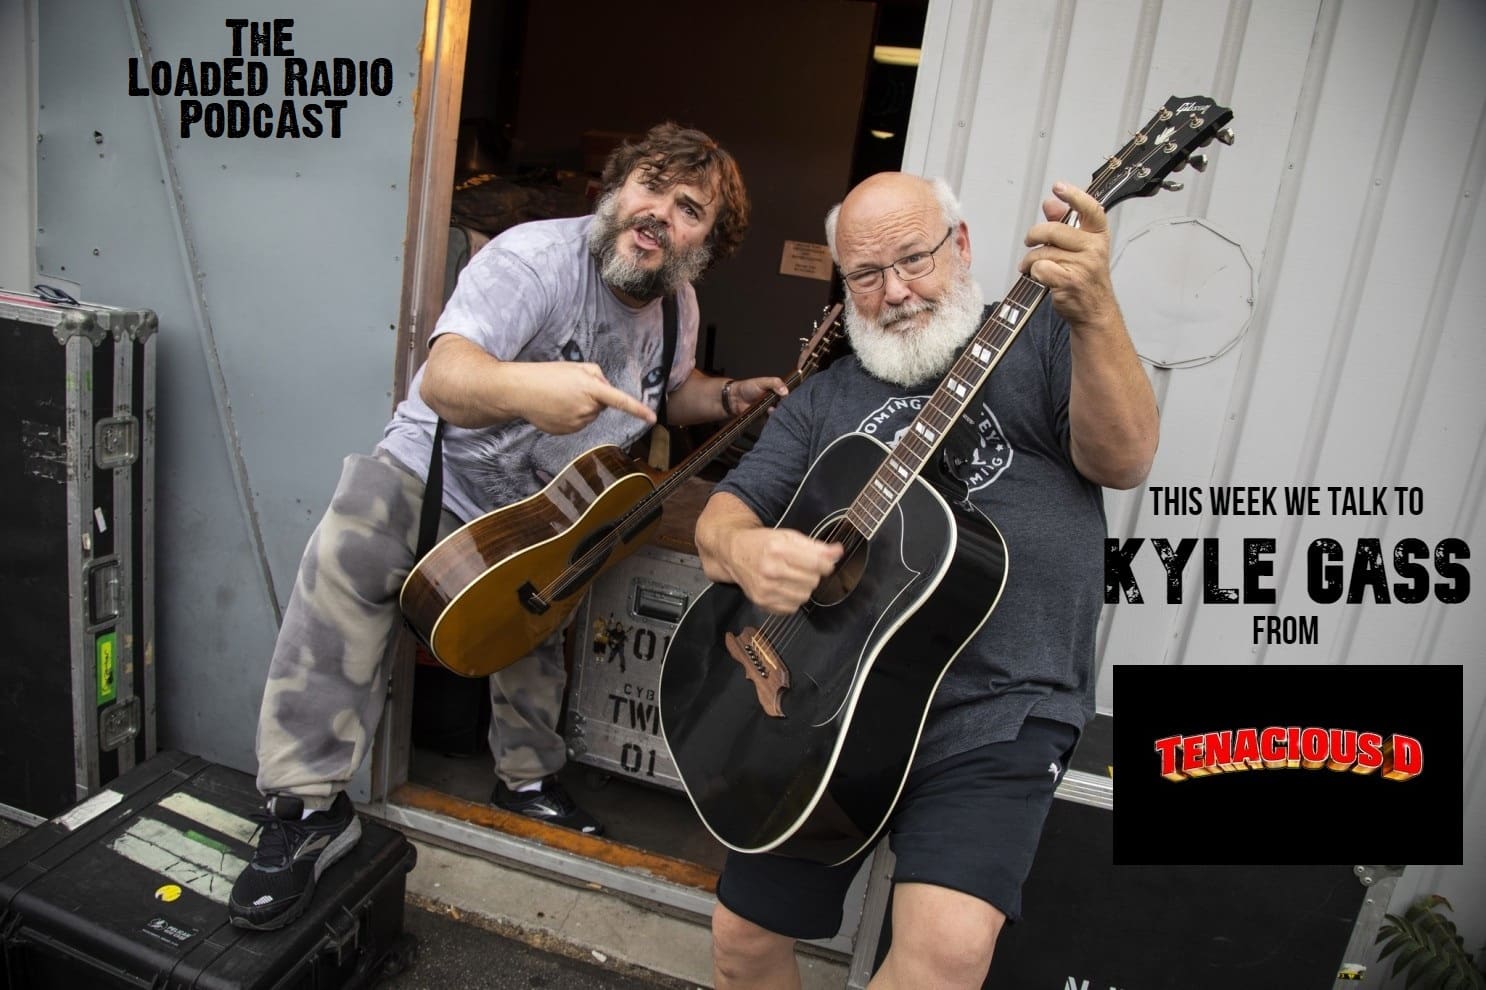 PODCAST: TENACIOUS D’s KYLE GASS Talks About Sequels, Vaccinations And His Friend JACK BLACK